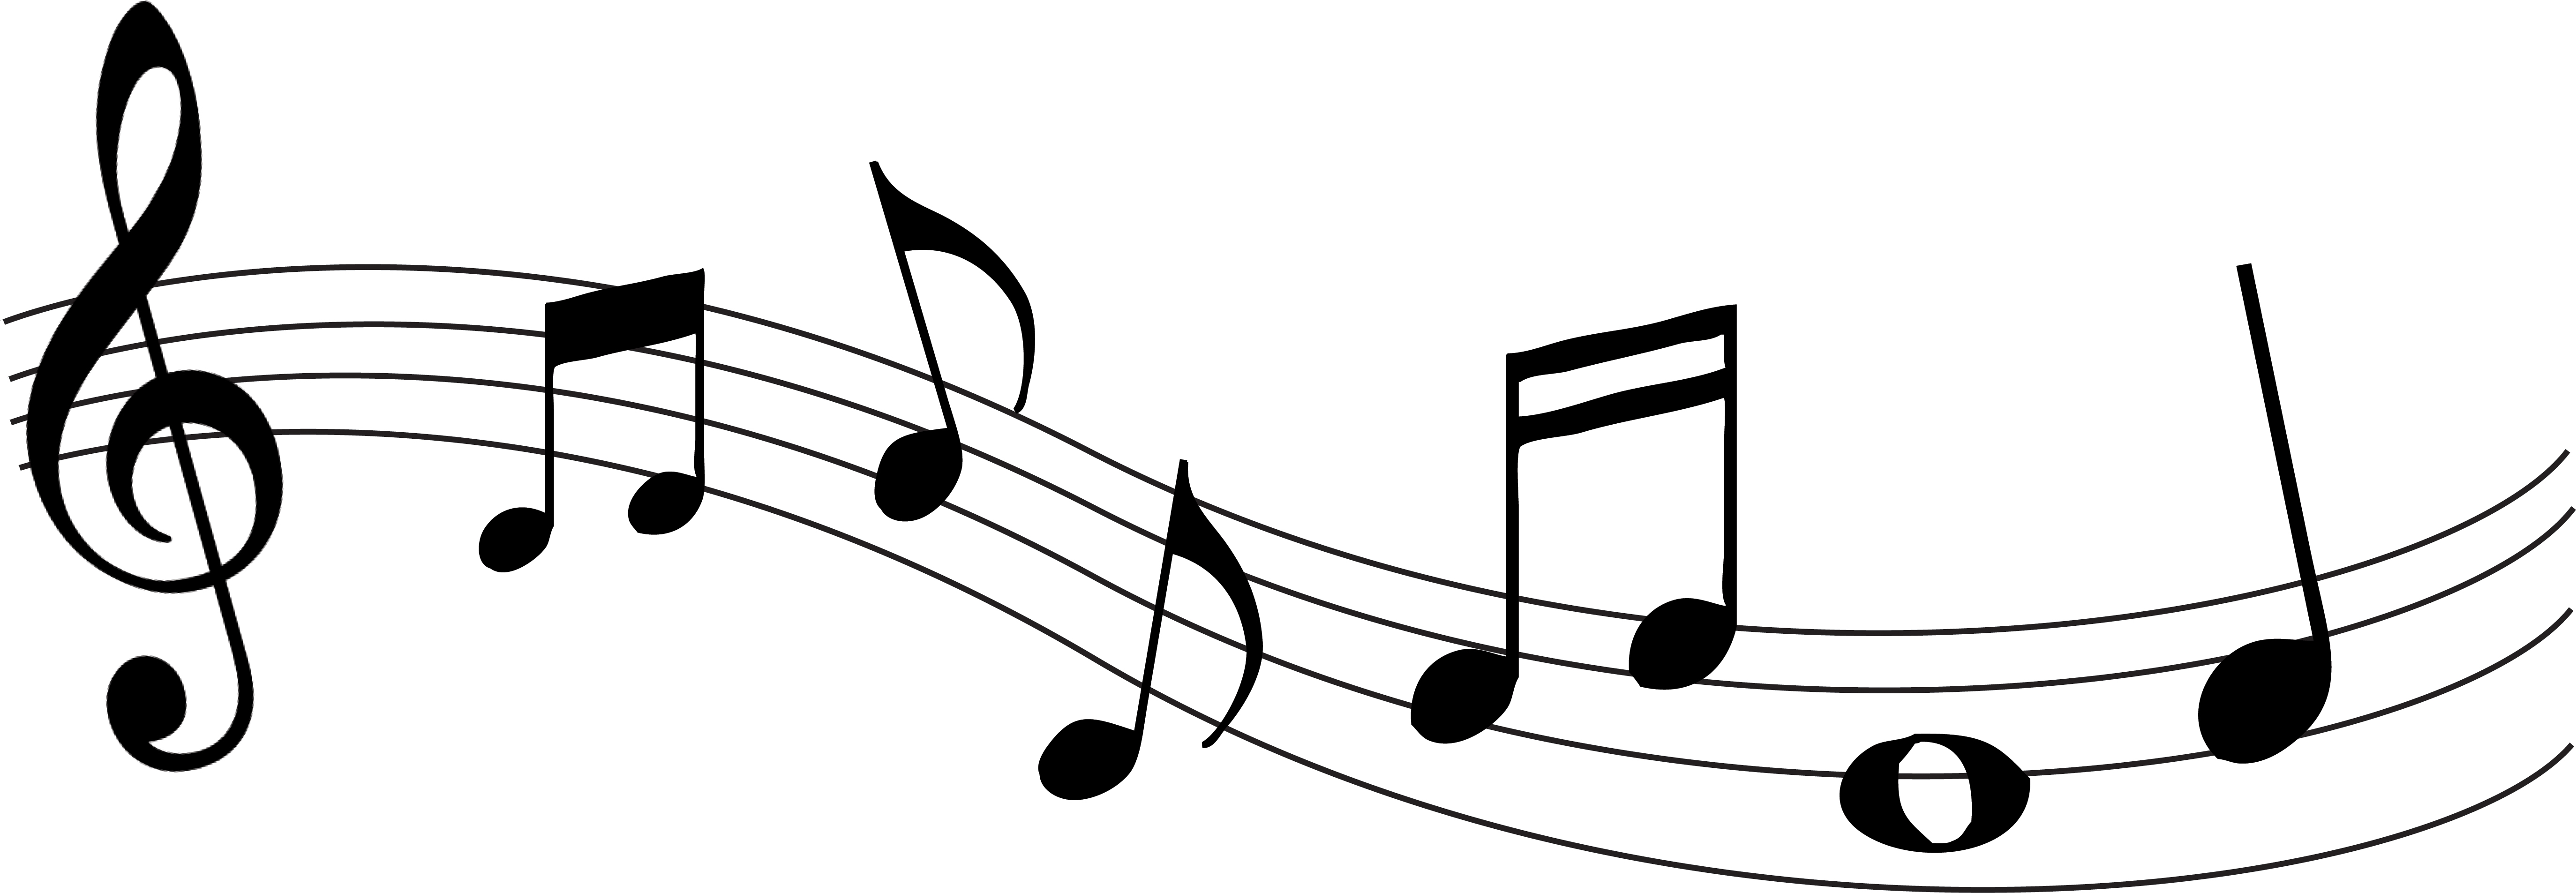 Images Of Music Symbols Free download on ClipArtMag